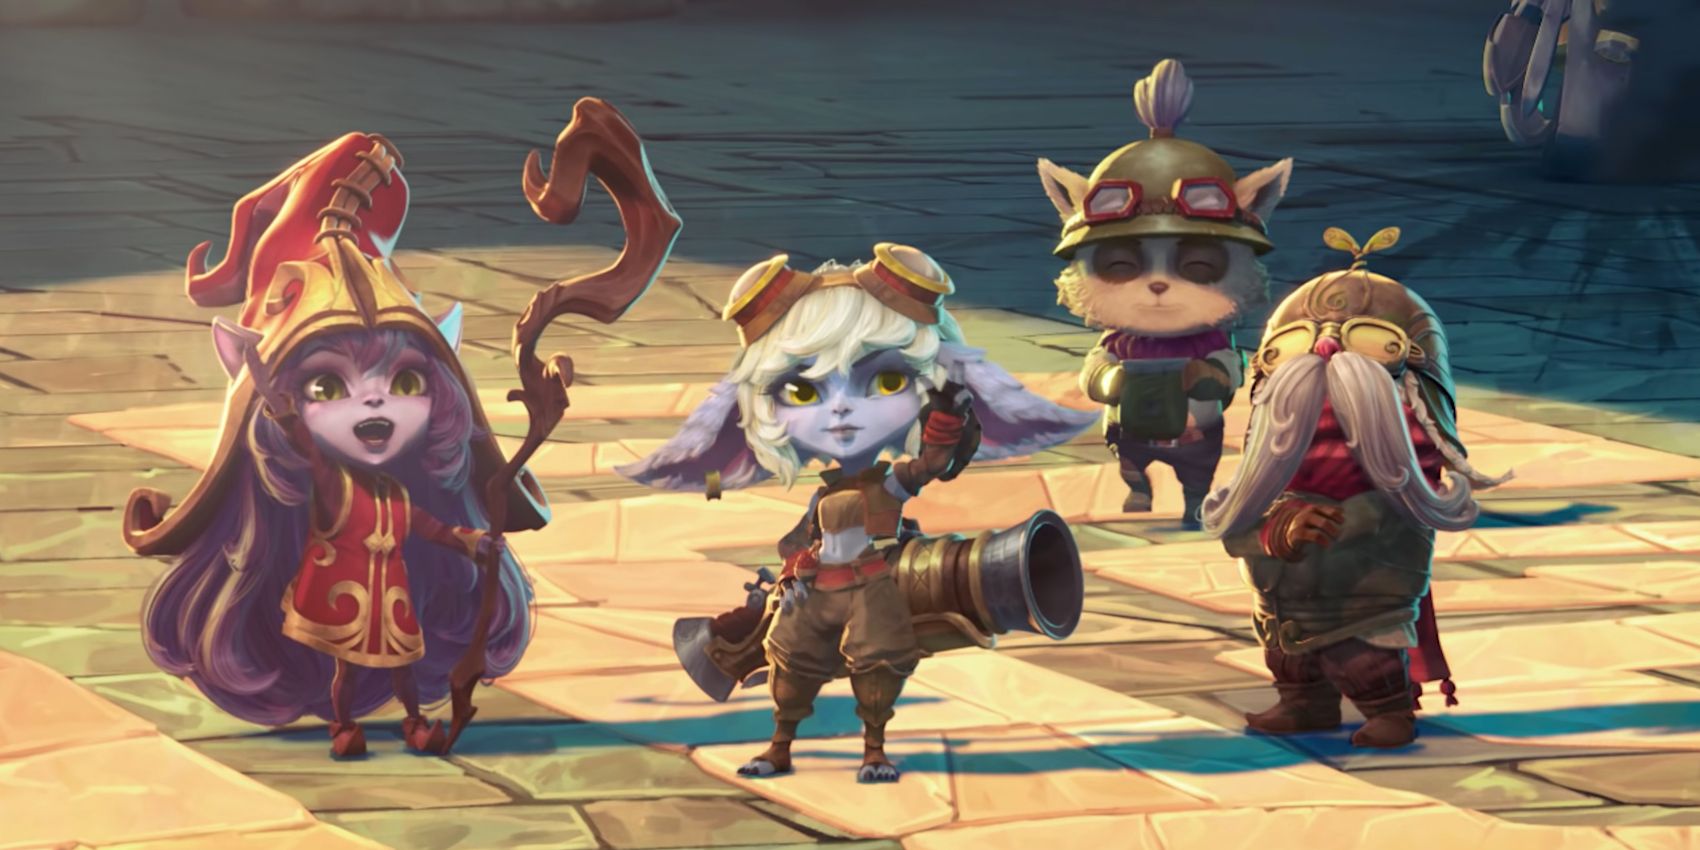 From left to right: Lulu, Tristiana, Teemo, and Corki.